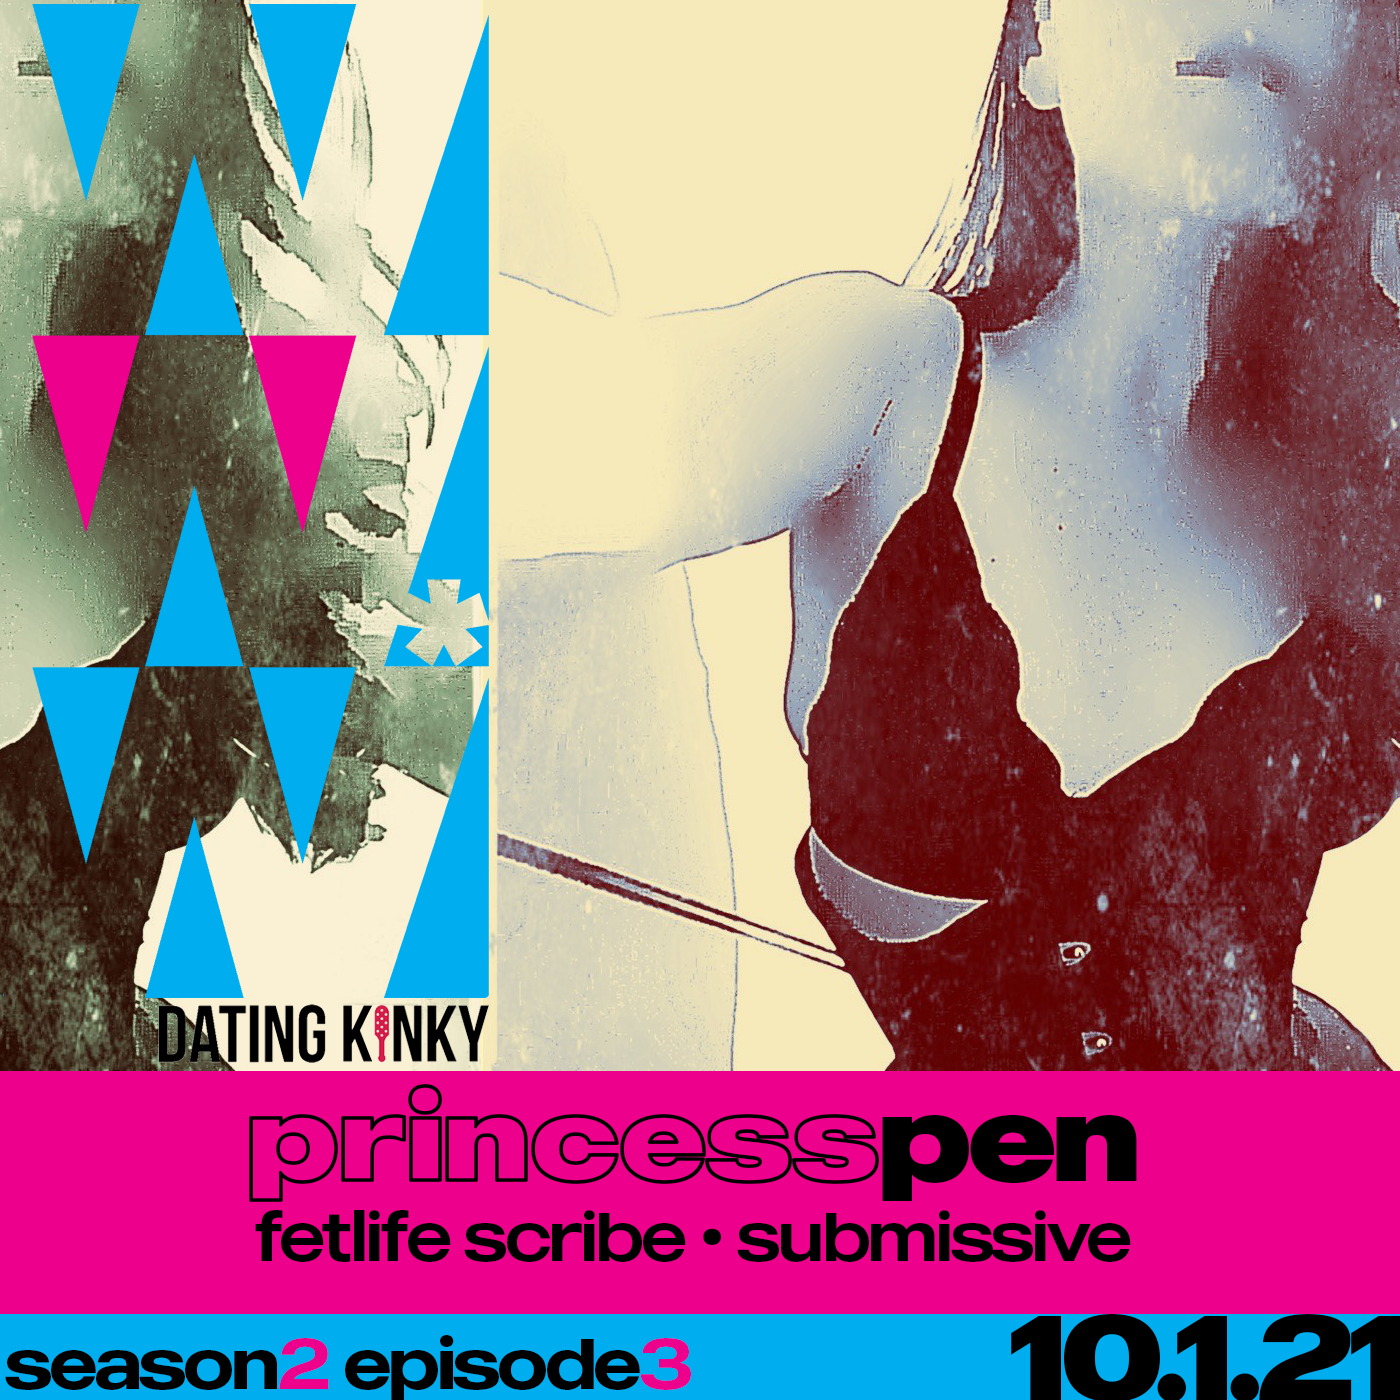 The Princess Pen: The Scribe of Fetlife